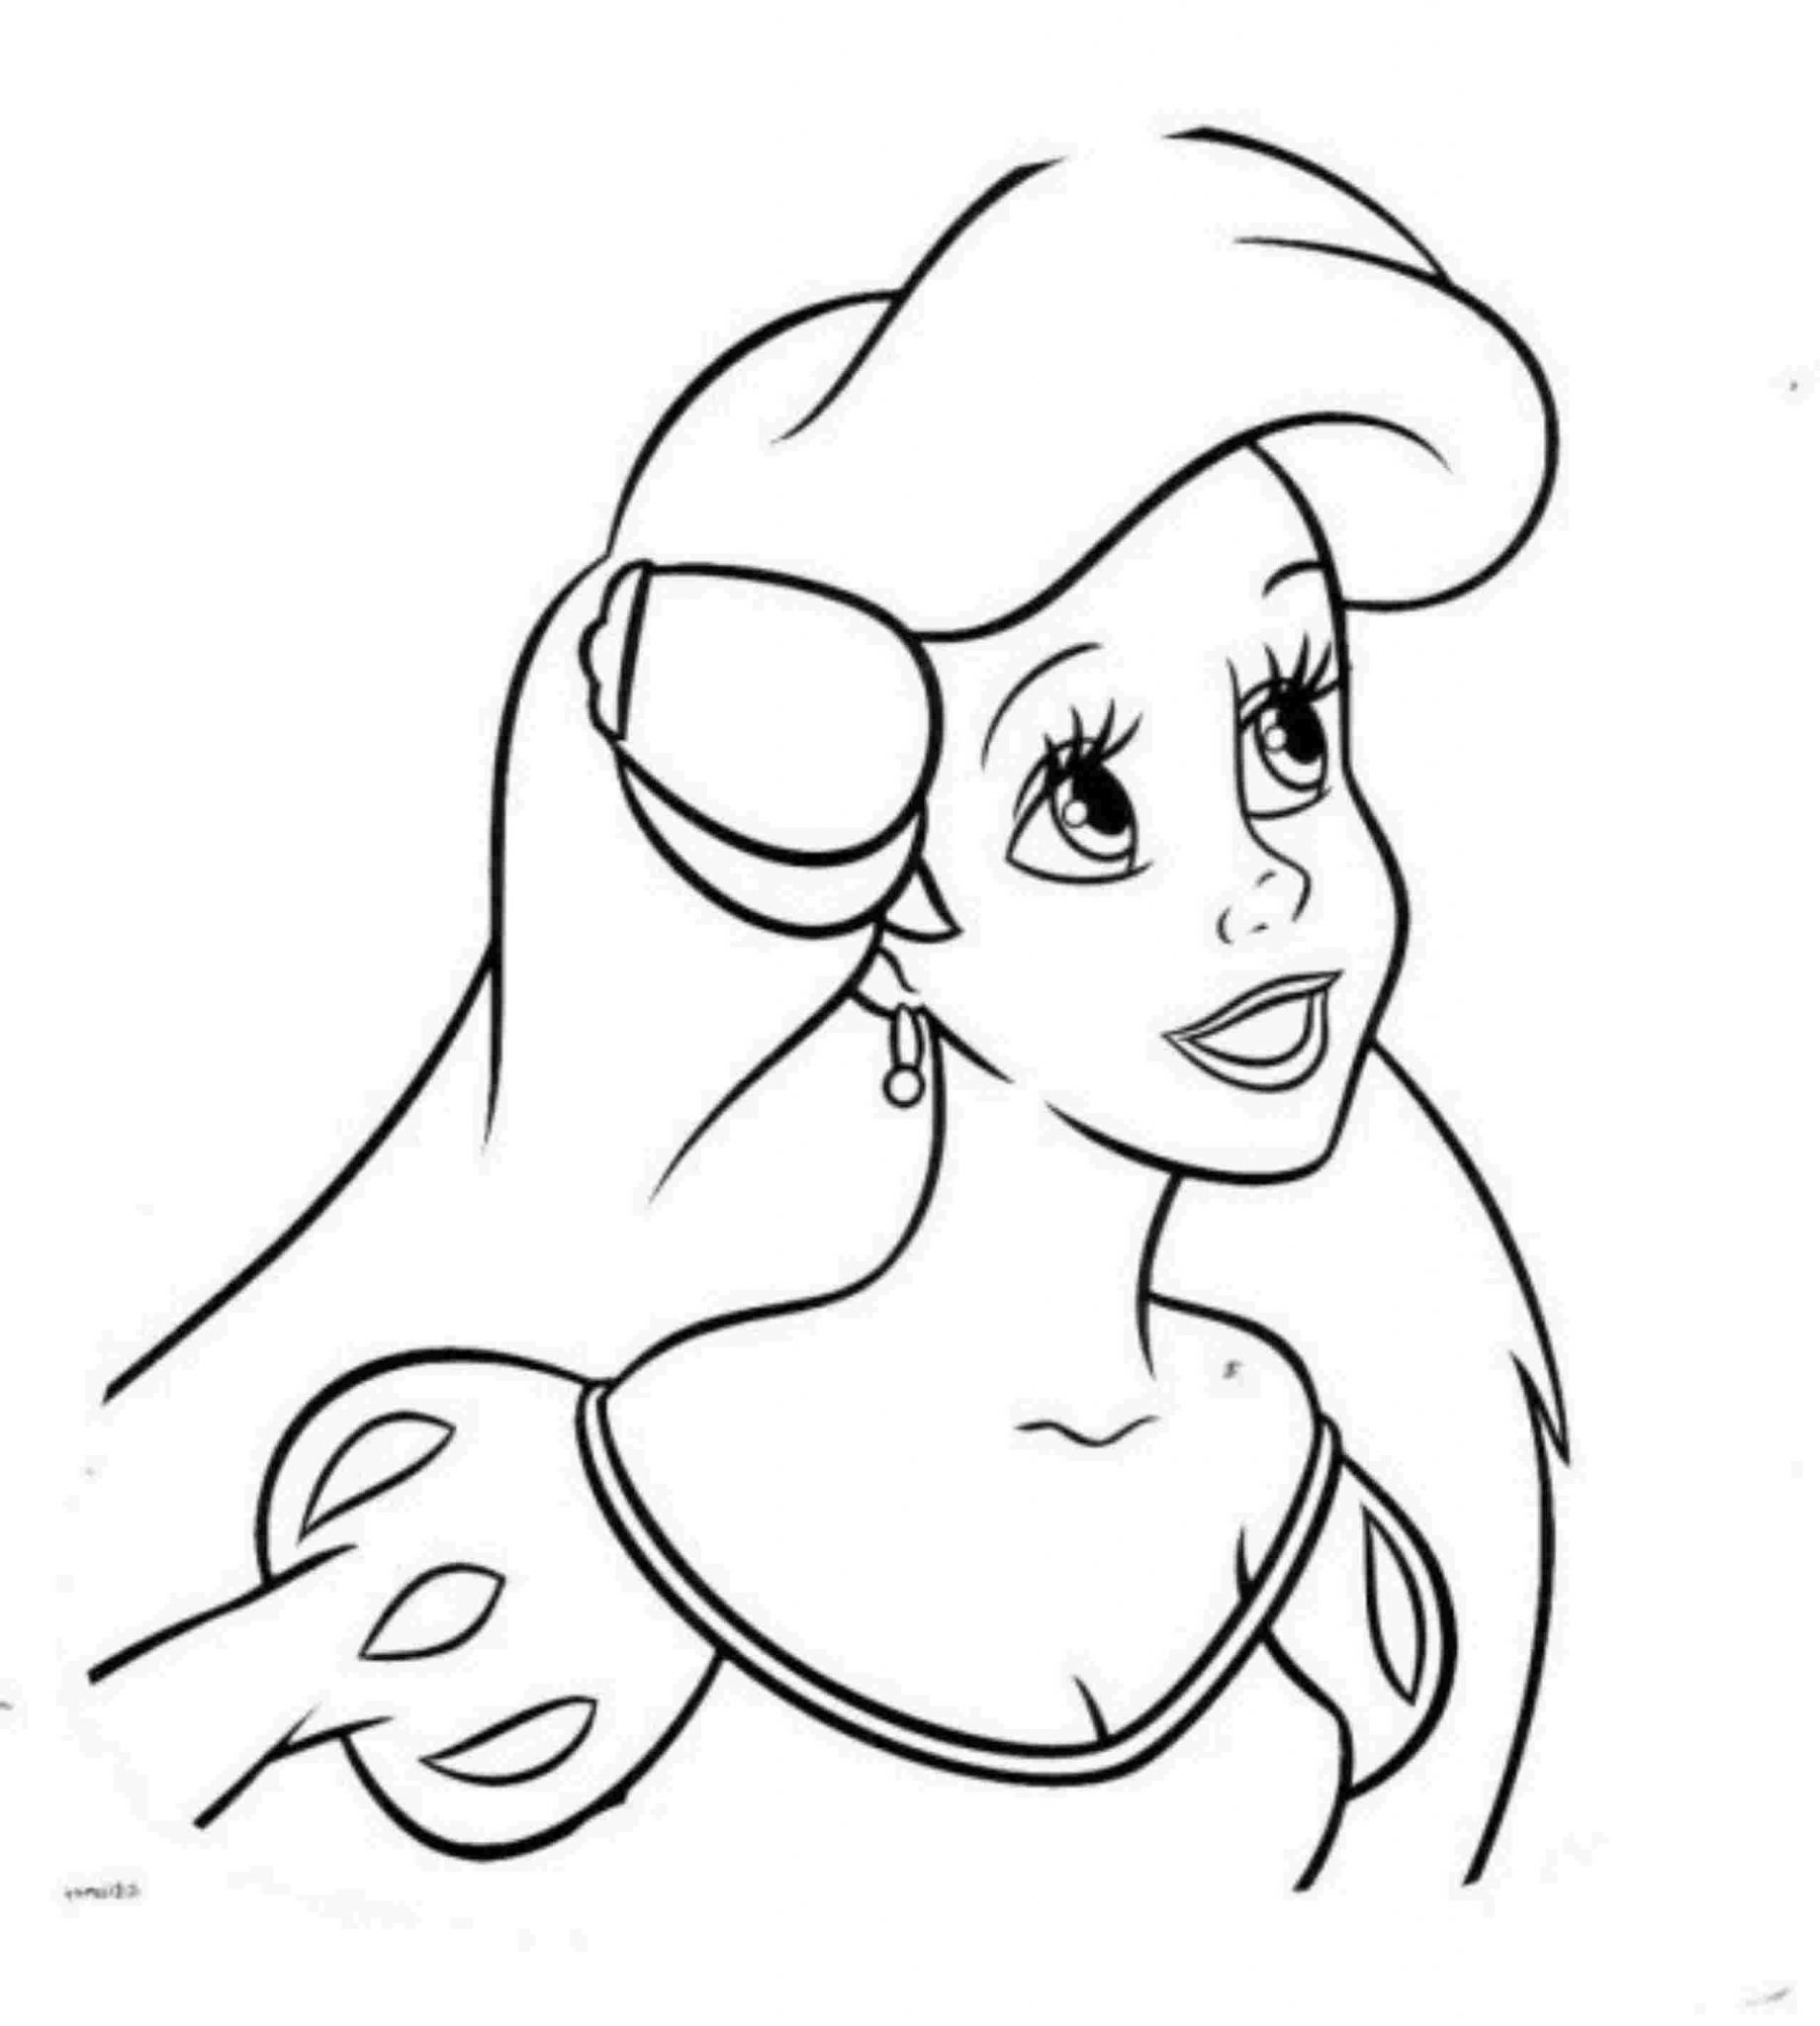 the-little-mermaid-2-coloring-pages | | BestAppsForKids.com